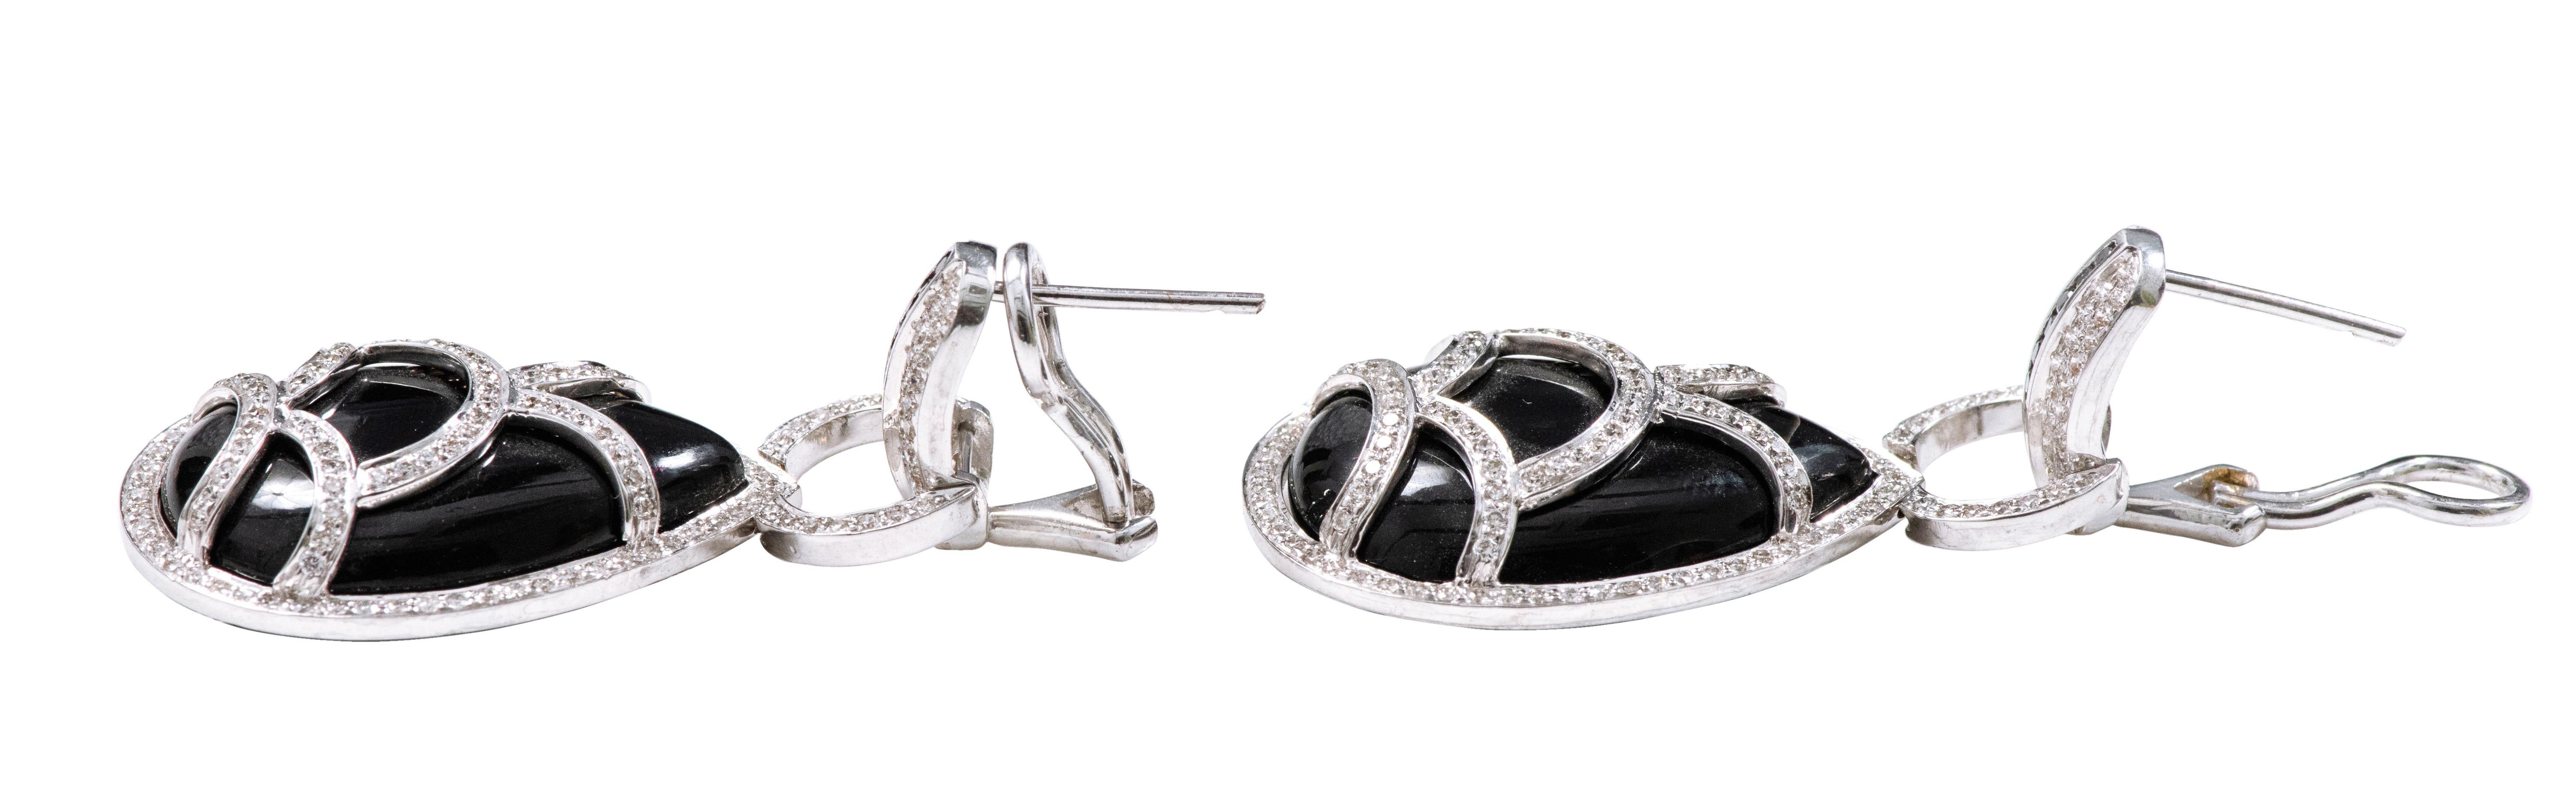 18 Karat White Gold 42.96 Carat Diamond and Black Onyx Drop Earrings In New Condition For Sale In Jaipur, IN